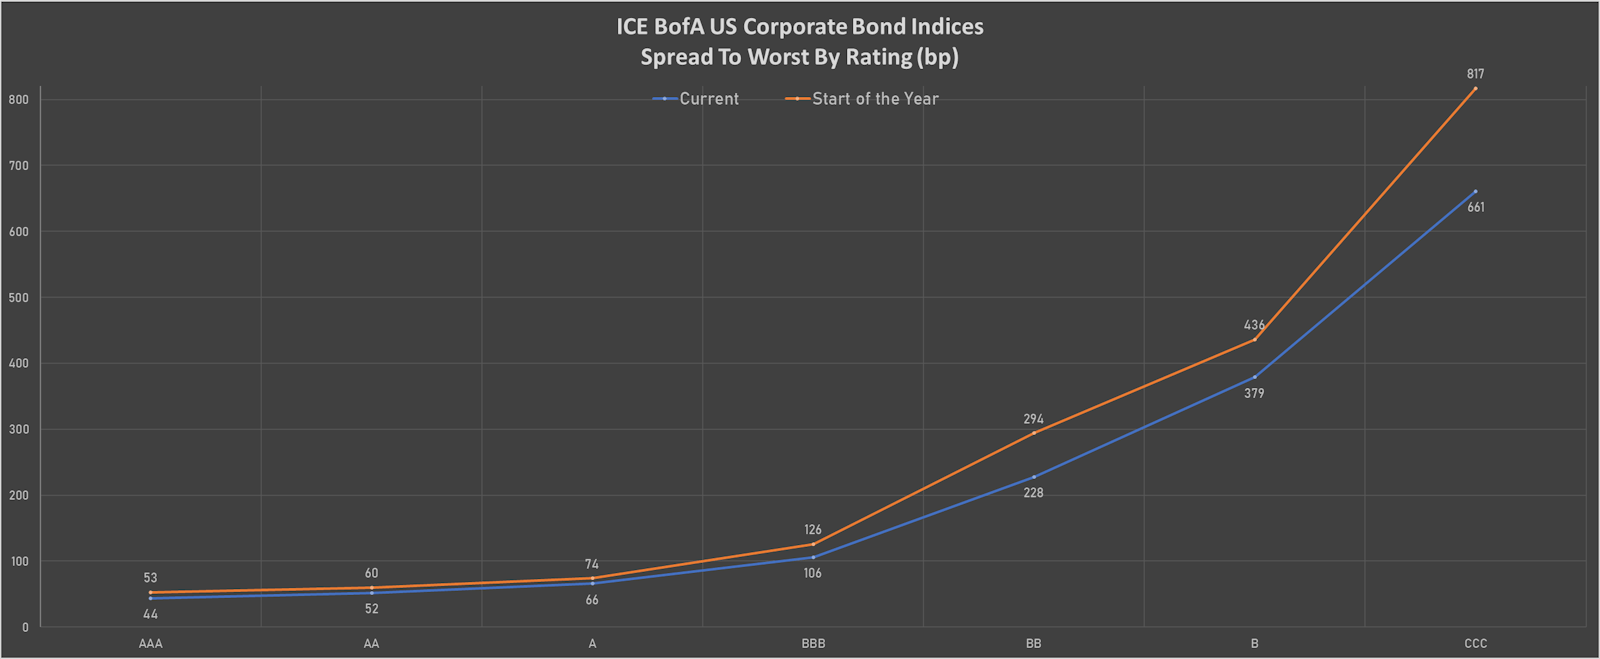 ICE BofAML US Corporate Spreads To Worst By Rating | Sources: ϕpost chart, Refinitiv data